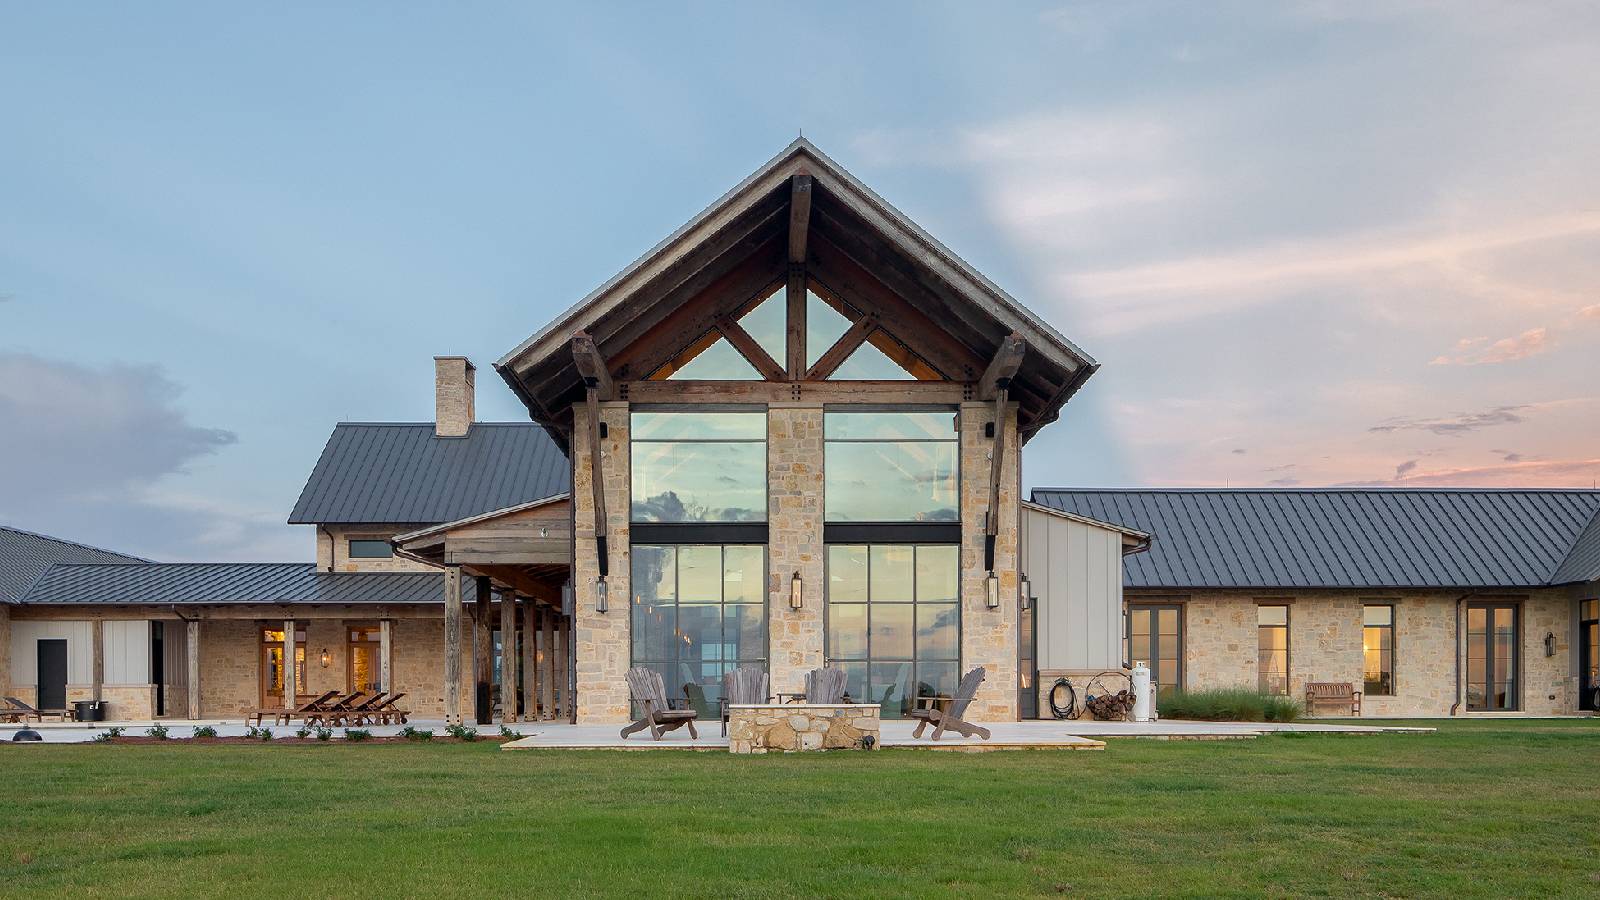 Exterior view of the back of Texas Ranch, a custom home designed and built by Farmer Payne Architects.